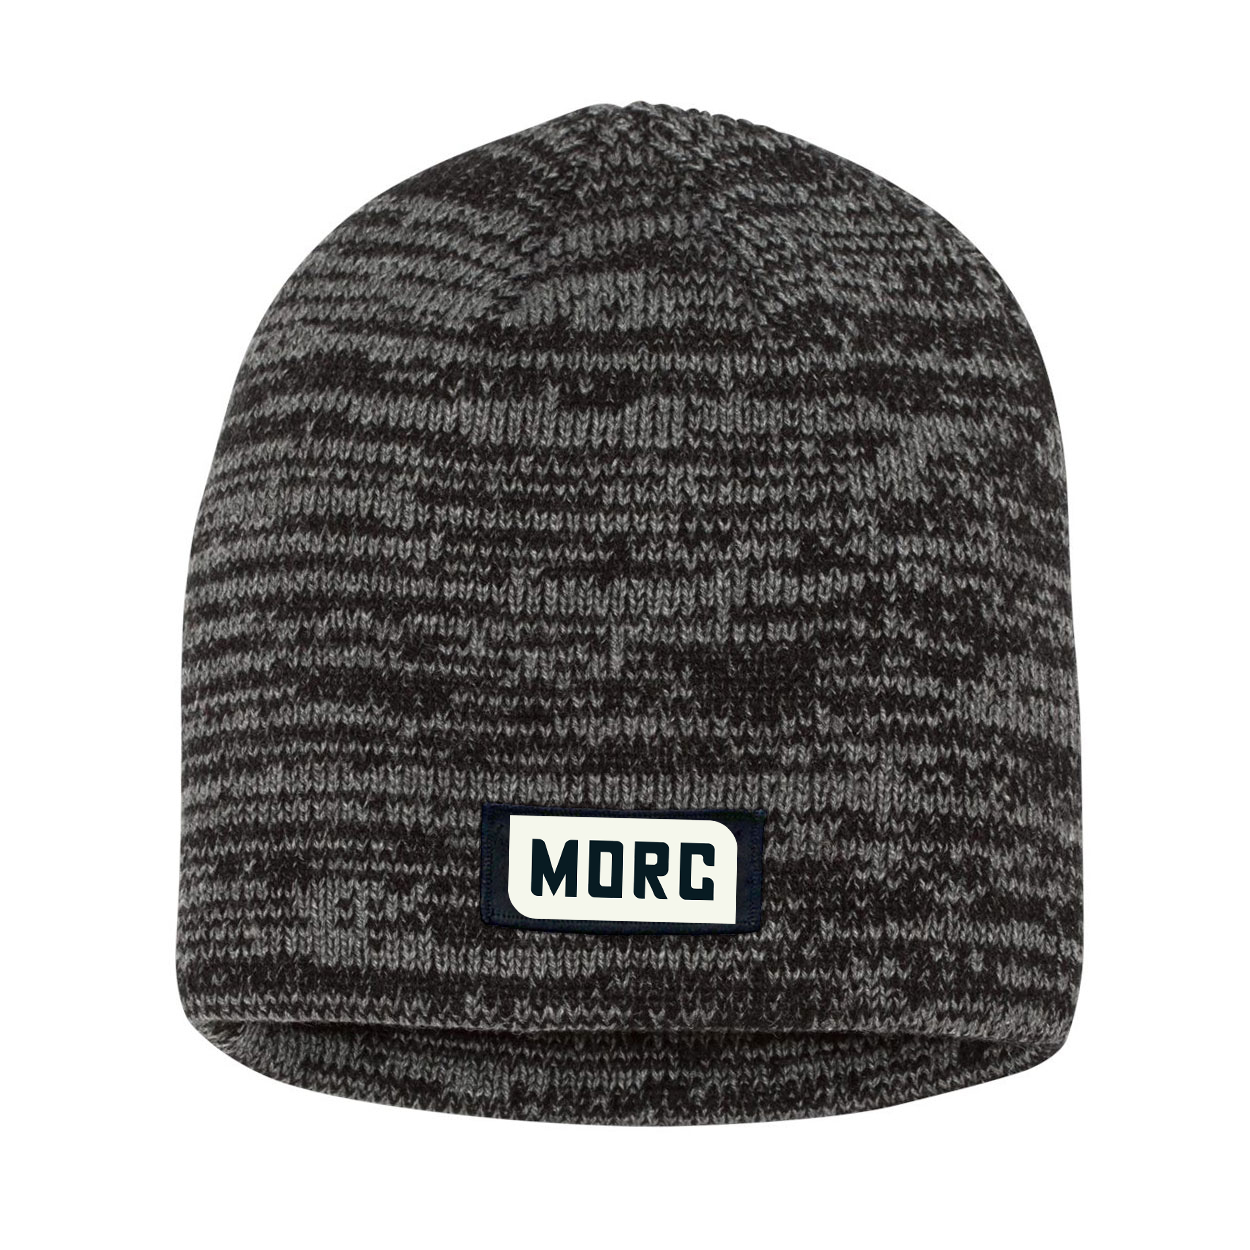 MORC Night Out Woven Patch Skully Marled Knit Beanie Black/Gray